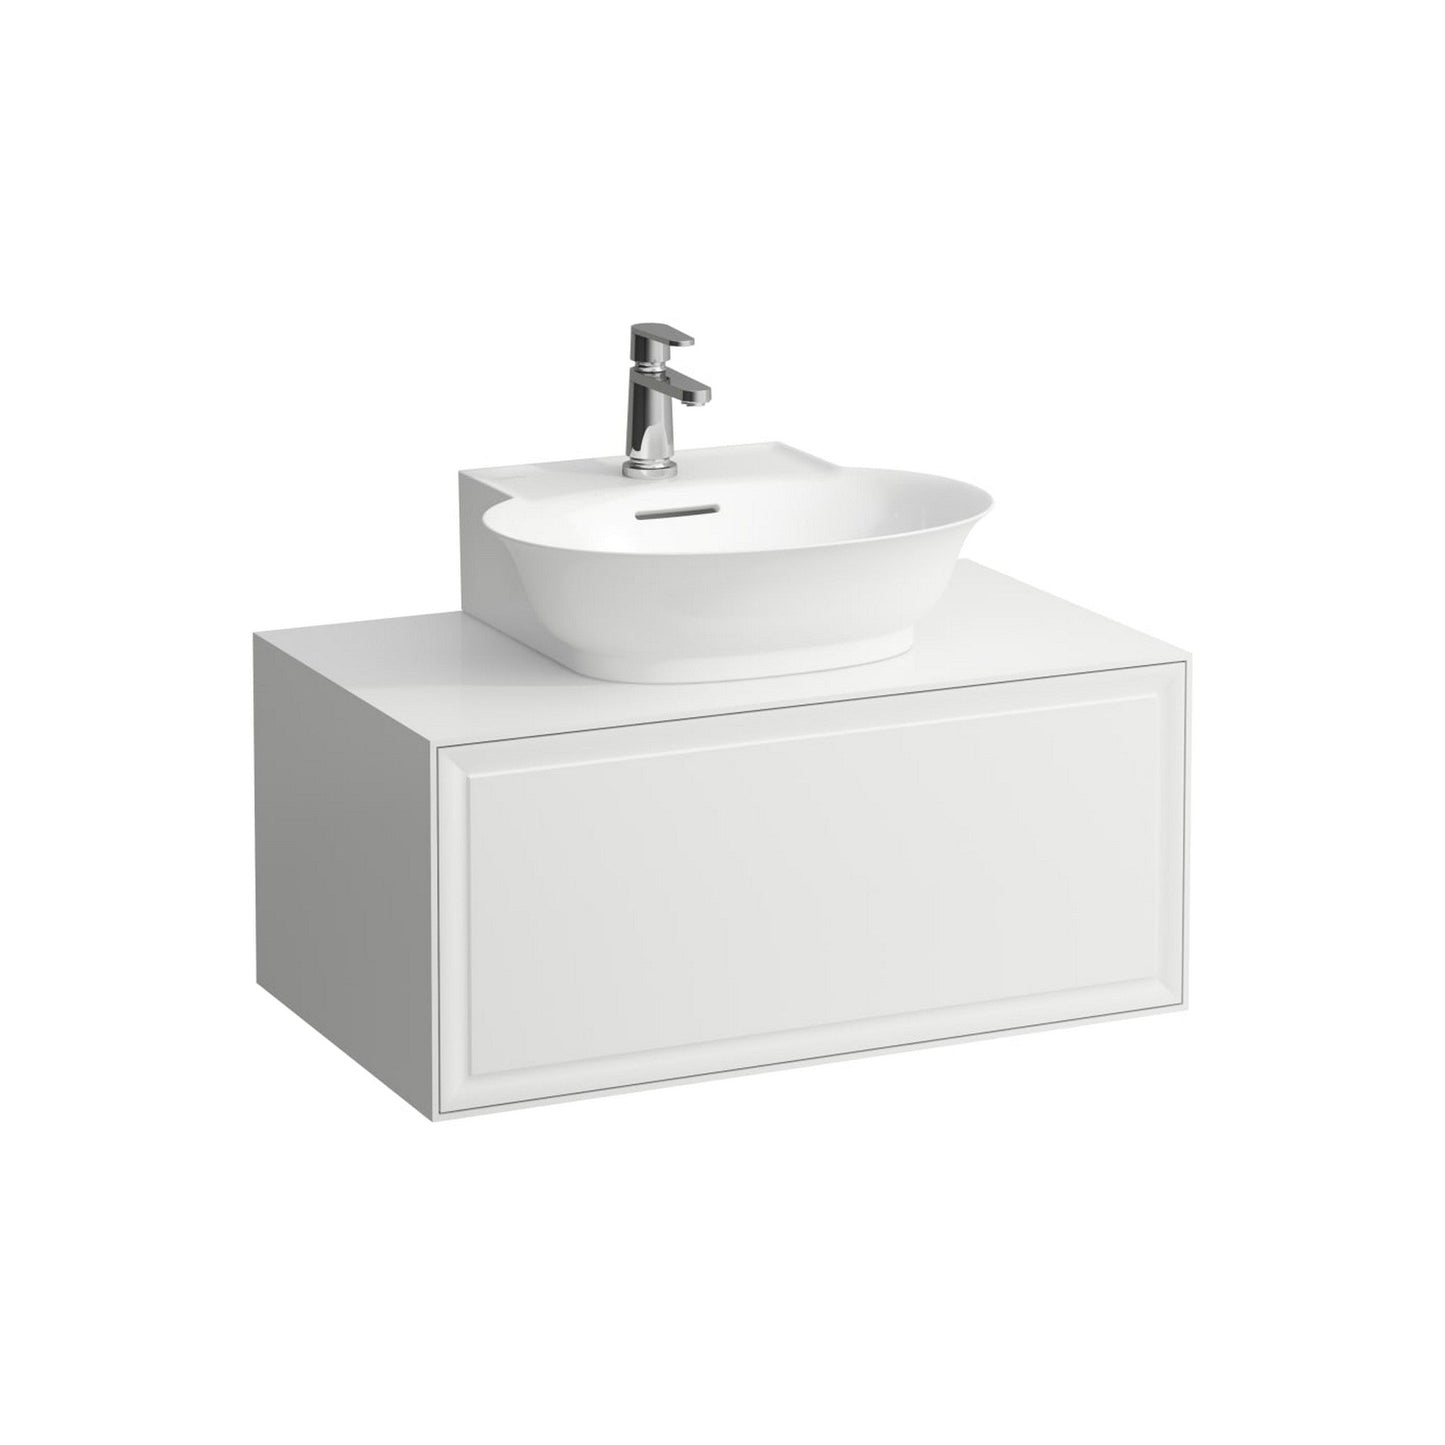 Laufen New Classic 31" 1-Drawer Matte White Wall-Mounted Vanity for New Classic Bathroom Sink Model: H816852